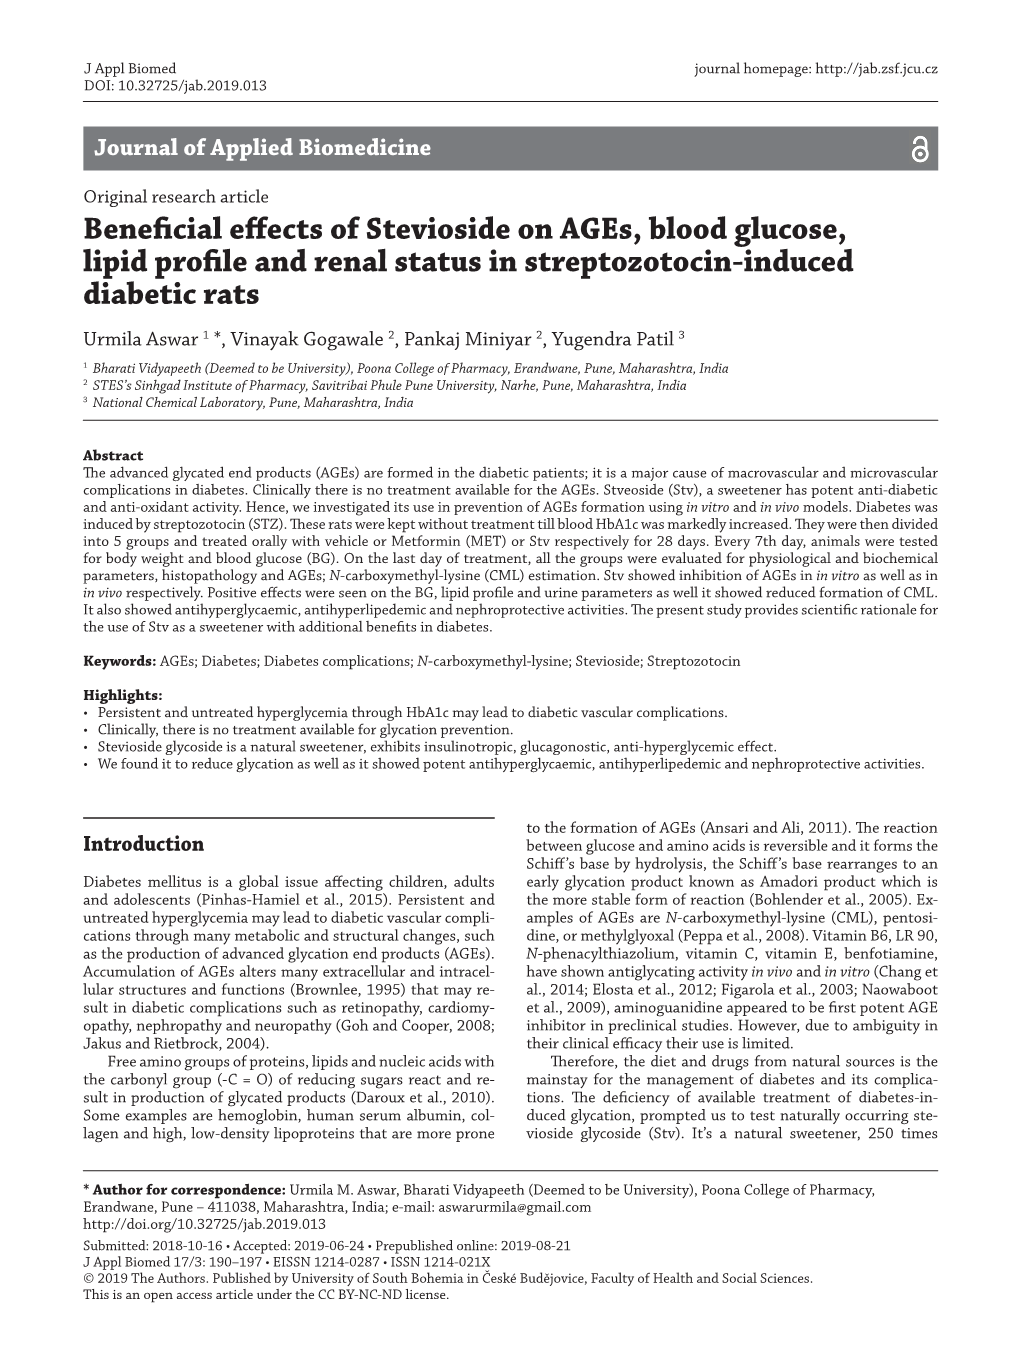 Beneficial Effects of Stevioside on Ages, Blood Glucose, Lipid Profile and Renal Status in Streptozotocin-Induced Diabetic Rats